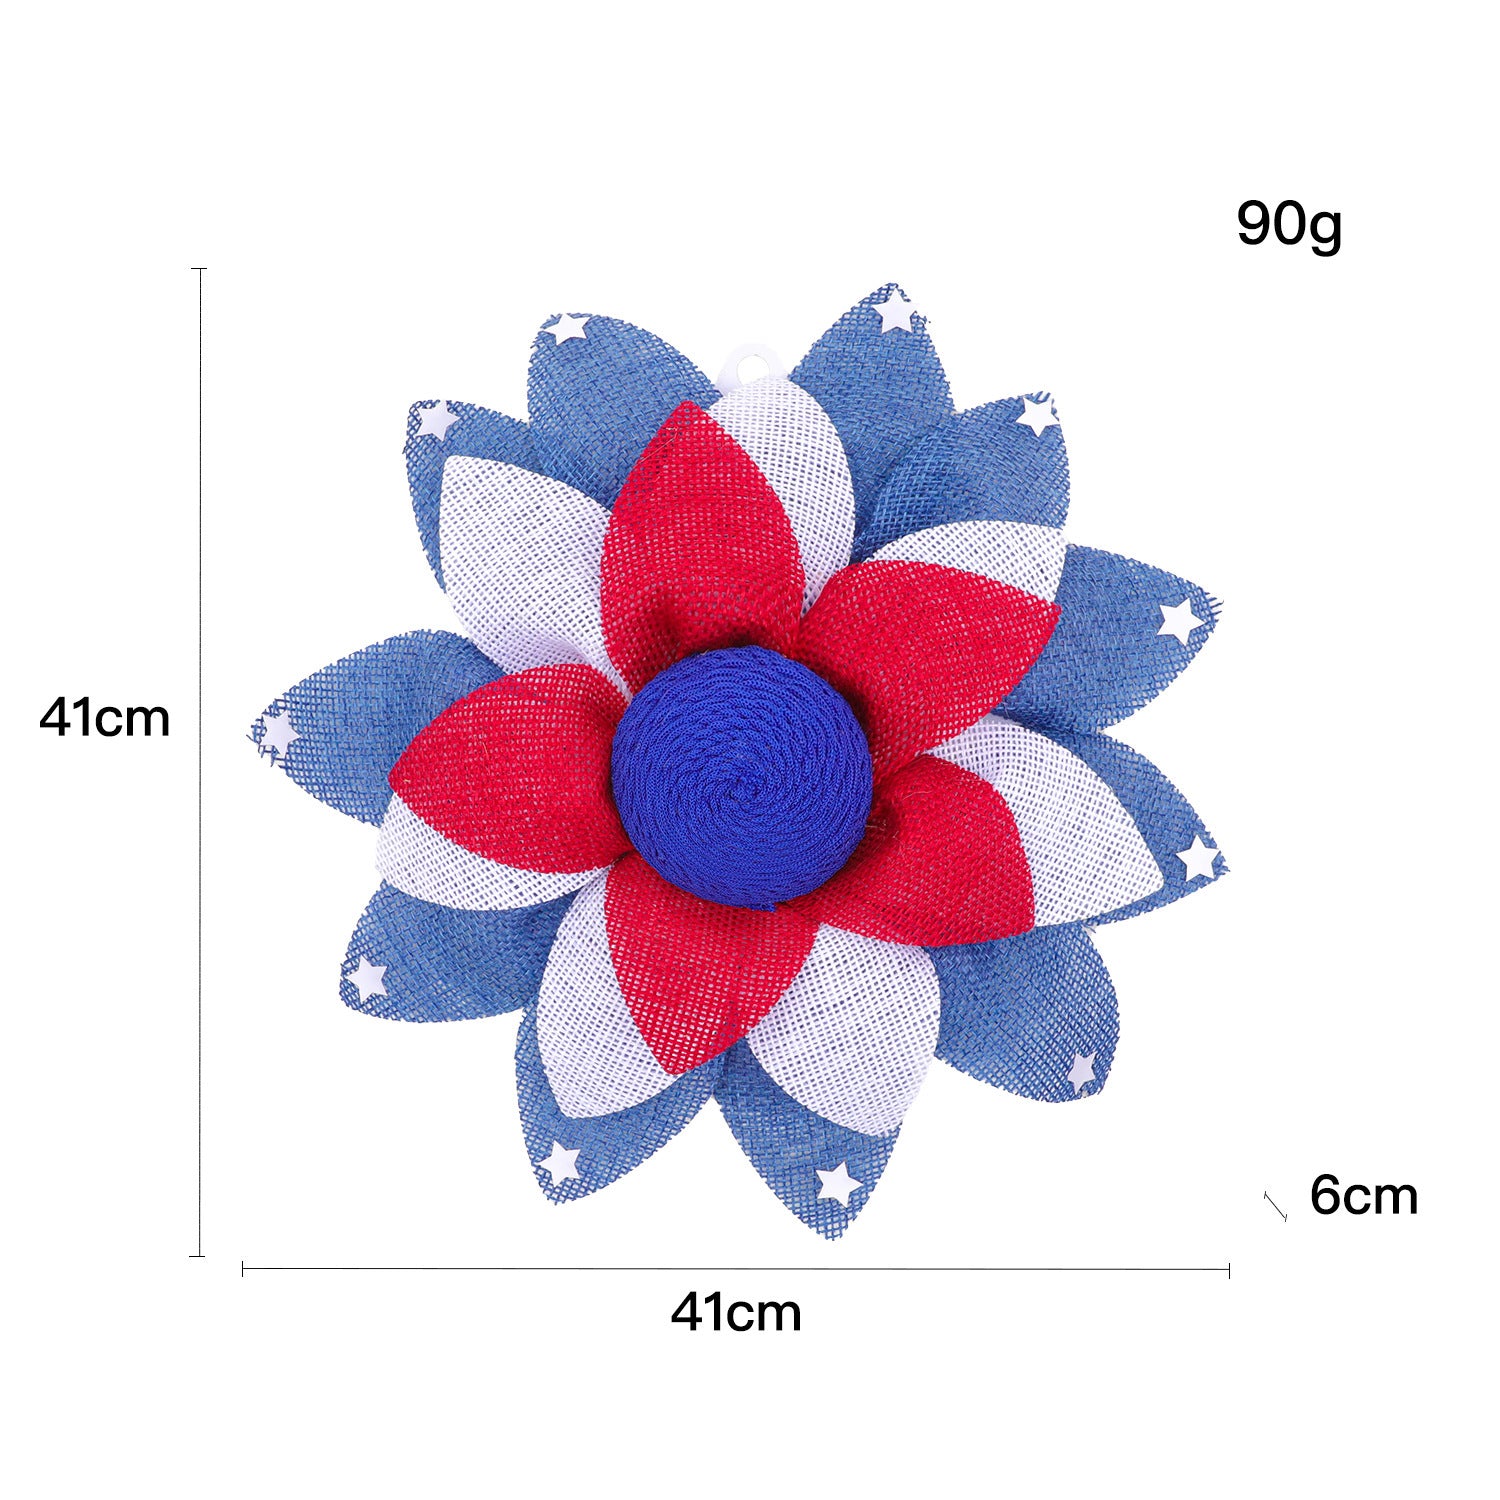 Independence Day Wreath Ornament Window Door Hanging, 4th of July decorations, American flag decorations, Patriotic decorations, Red, white and blue decorations, July 4th wreaths, July 4th garlands, July 4th centerpieces,